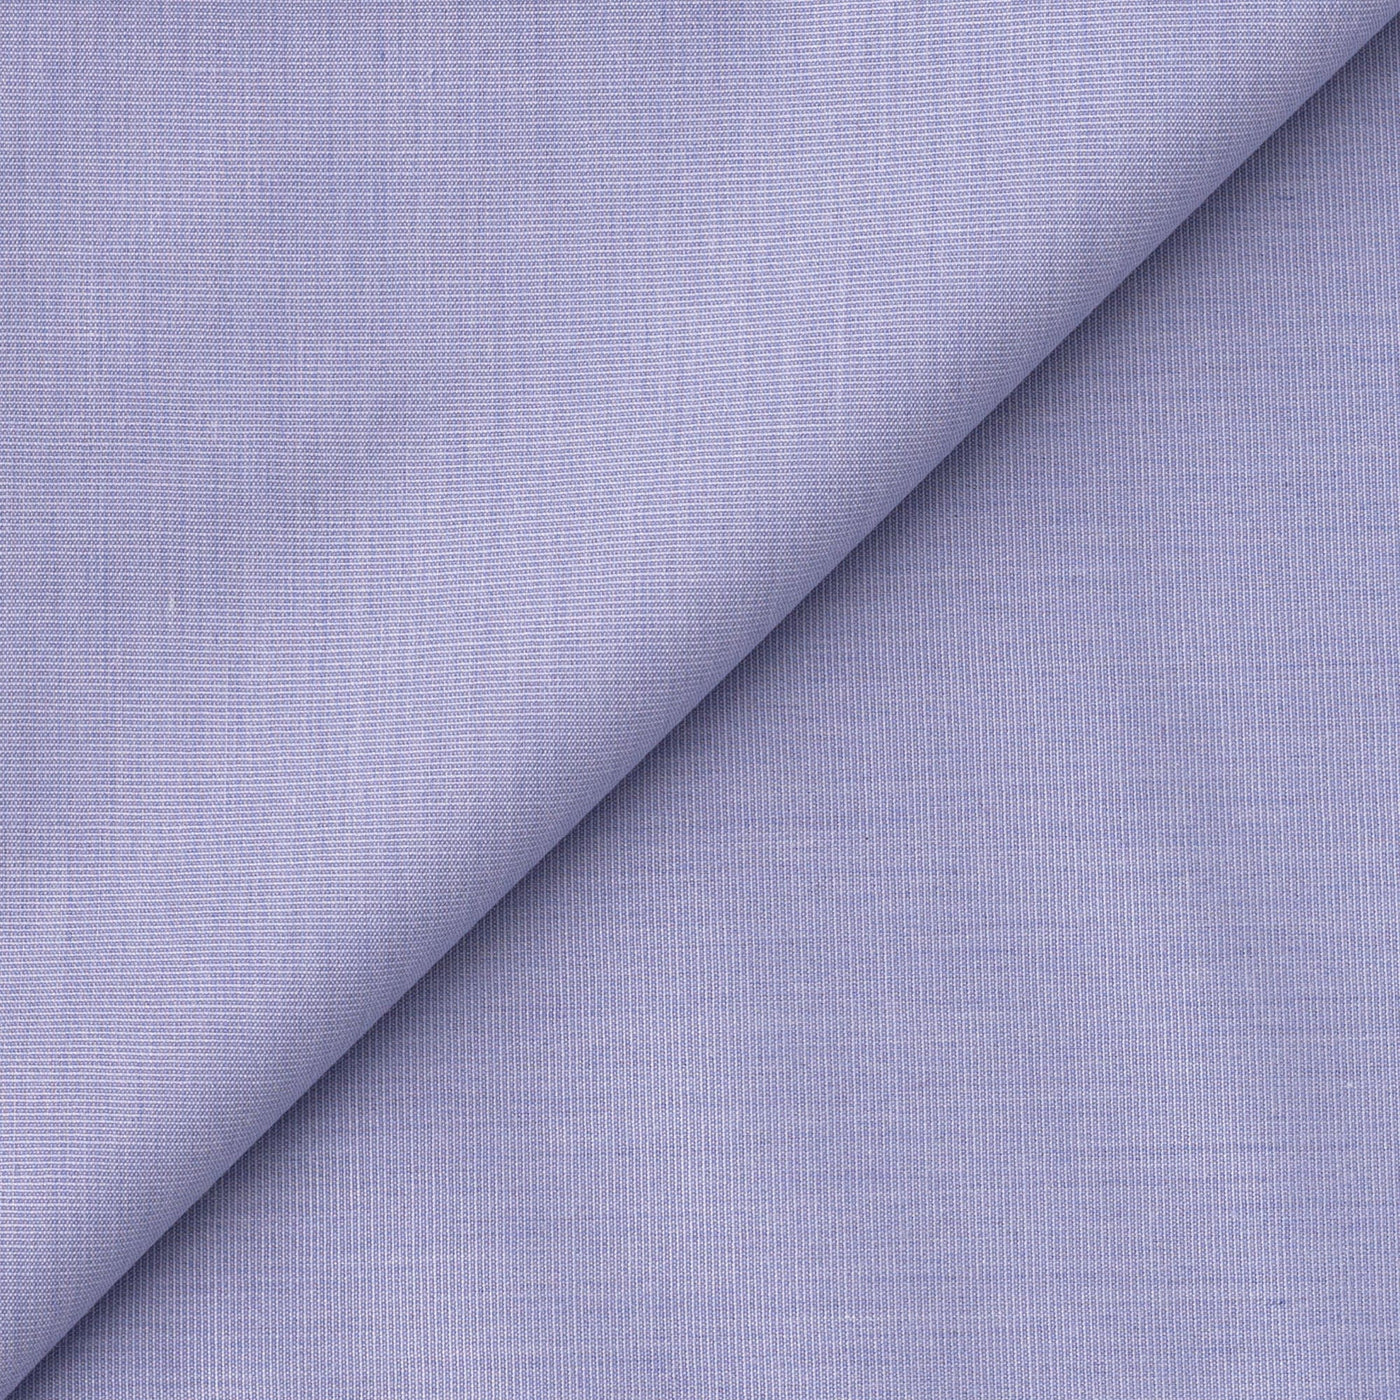 Fabric Pandit Fabric Men's Pastel Violet Textured Cotton Shirting Fabric (Width 58 inch)